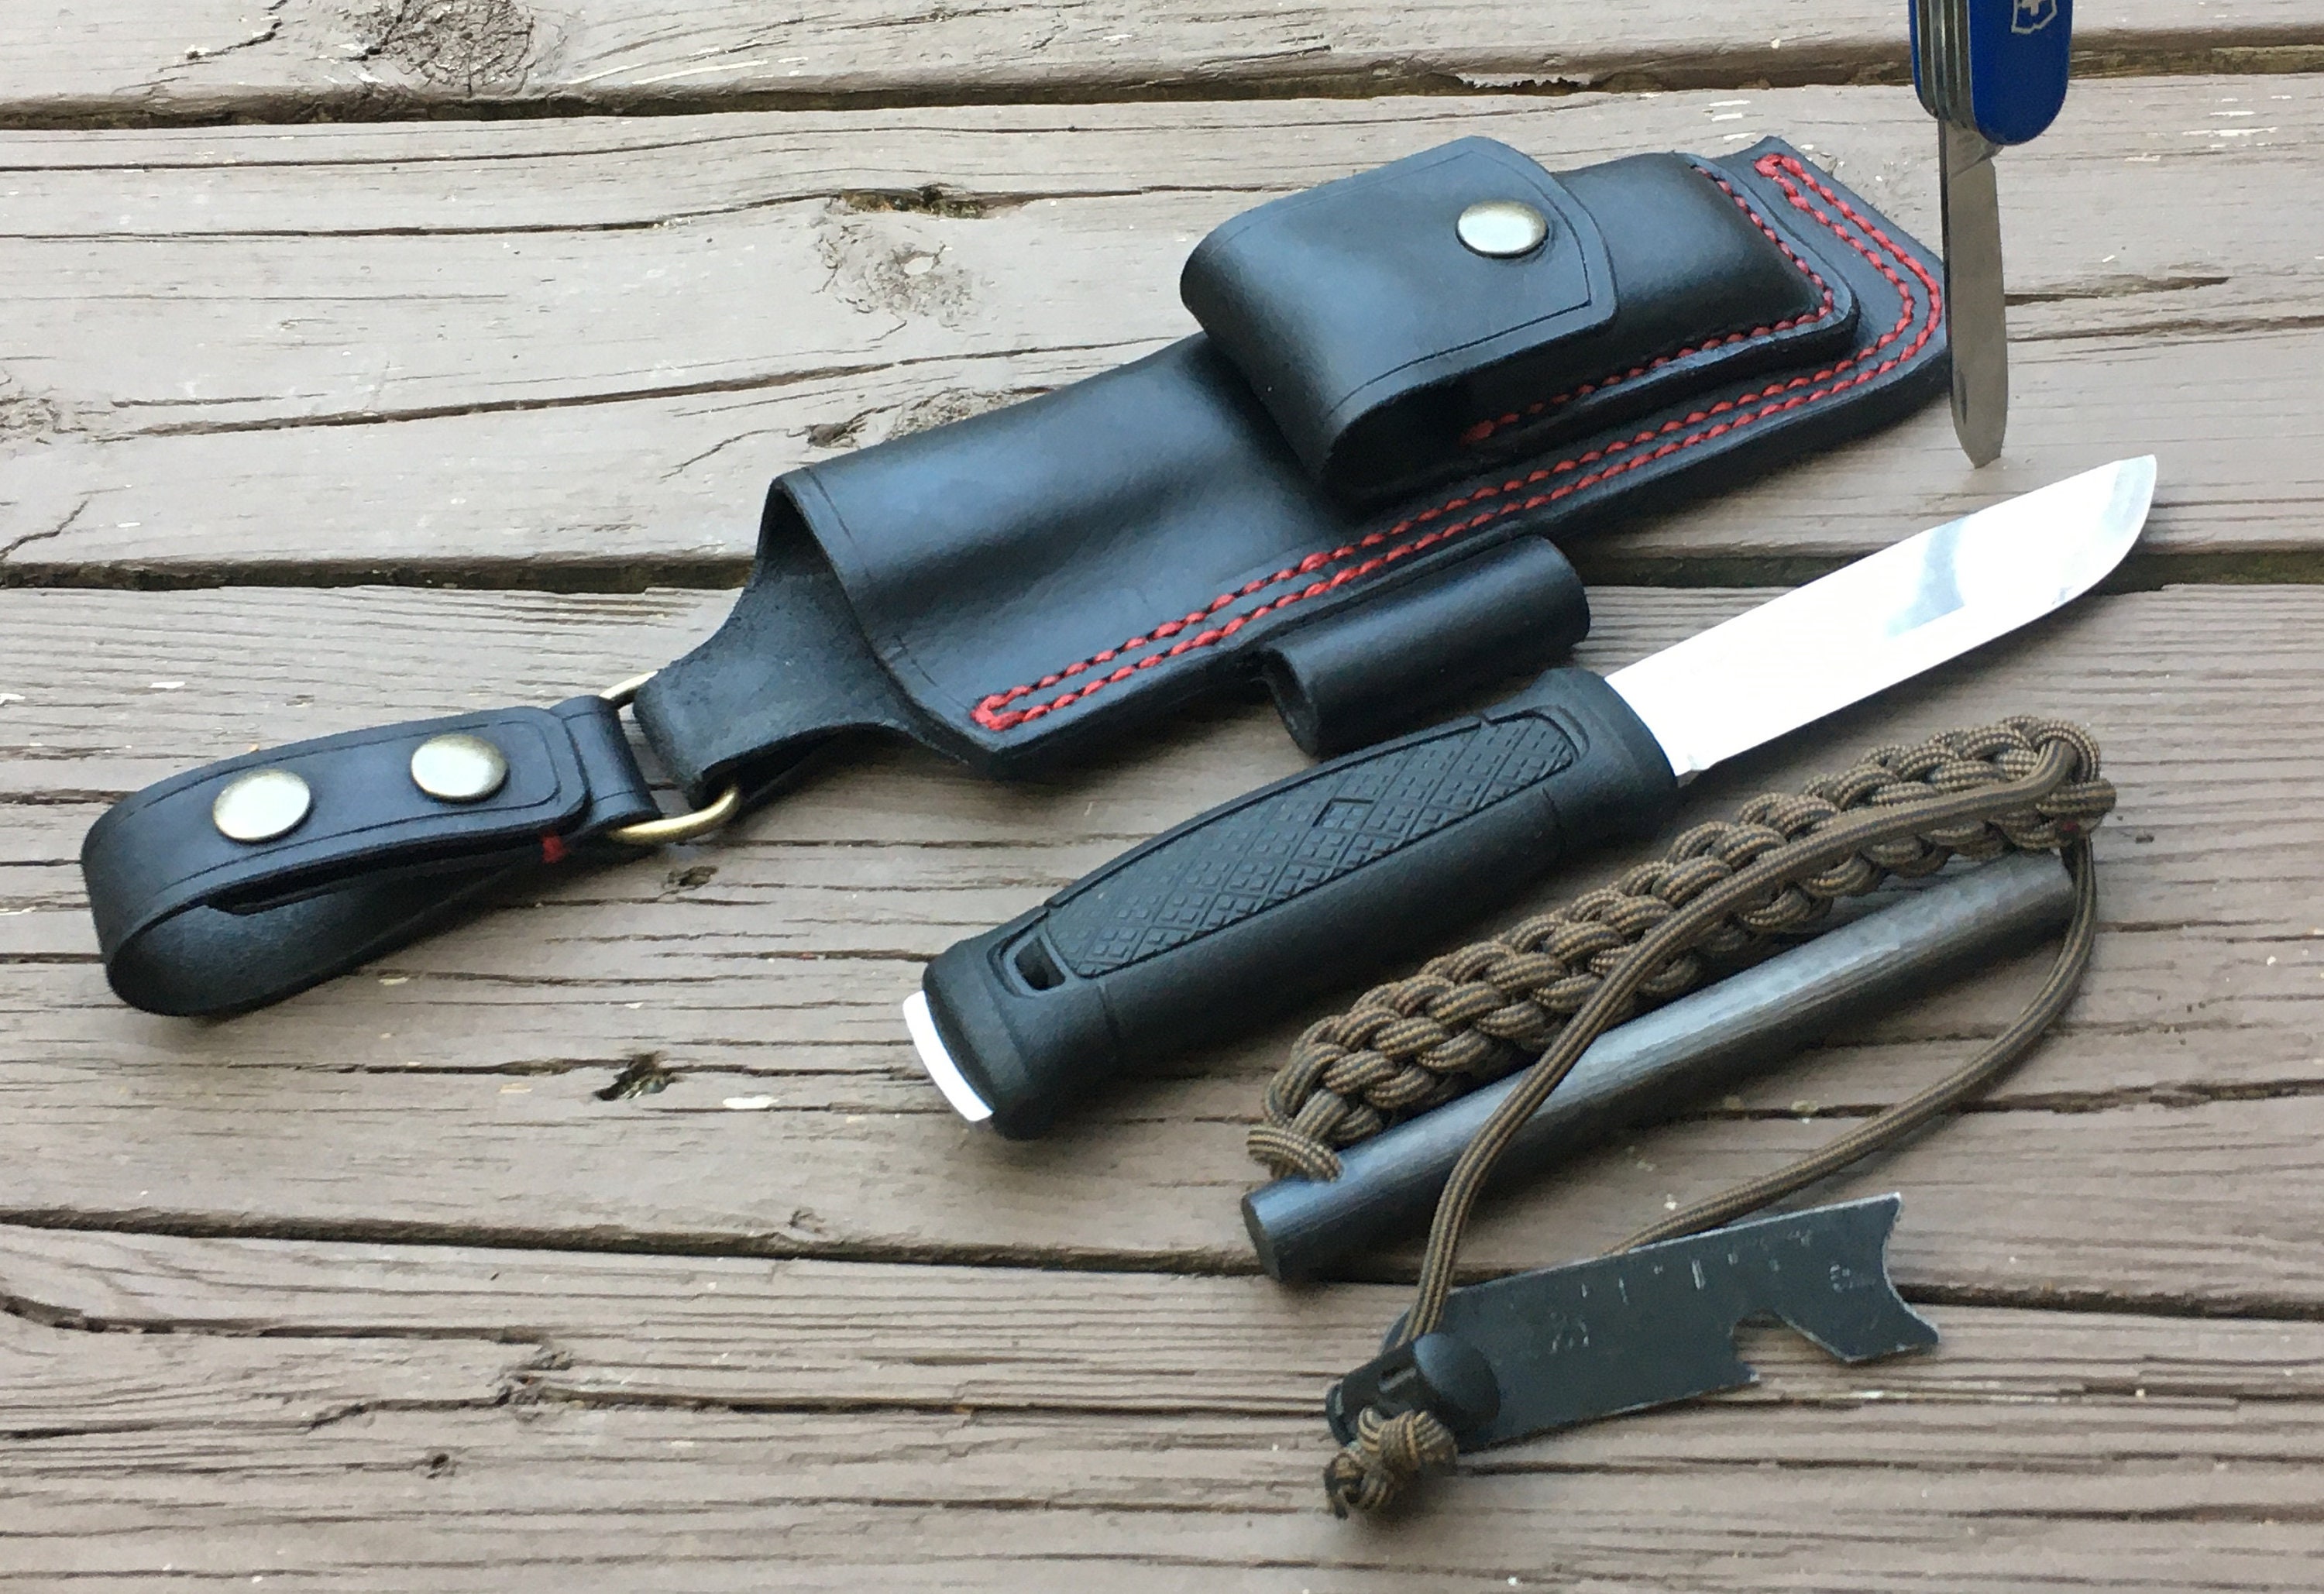 BPS Knives - Belt Knife Sheath - Black Leather Sheath for Mora Garberg -  Sheath with Belt Loop for Vertical Carry of Fixed Blade Knife - Free  Suspension Leather Case 